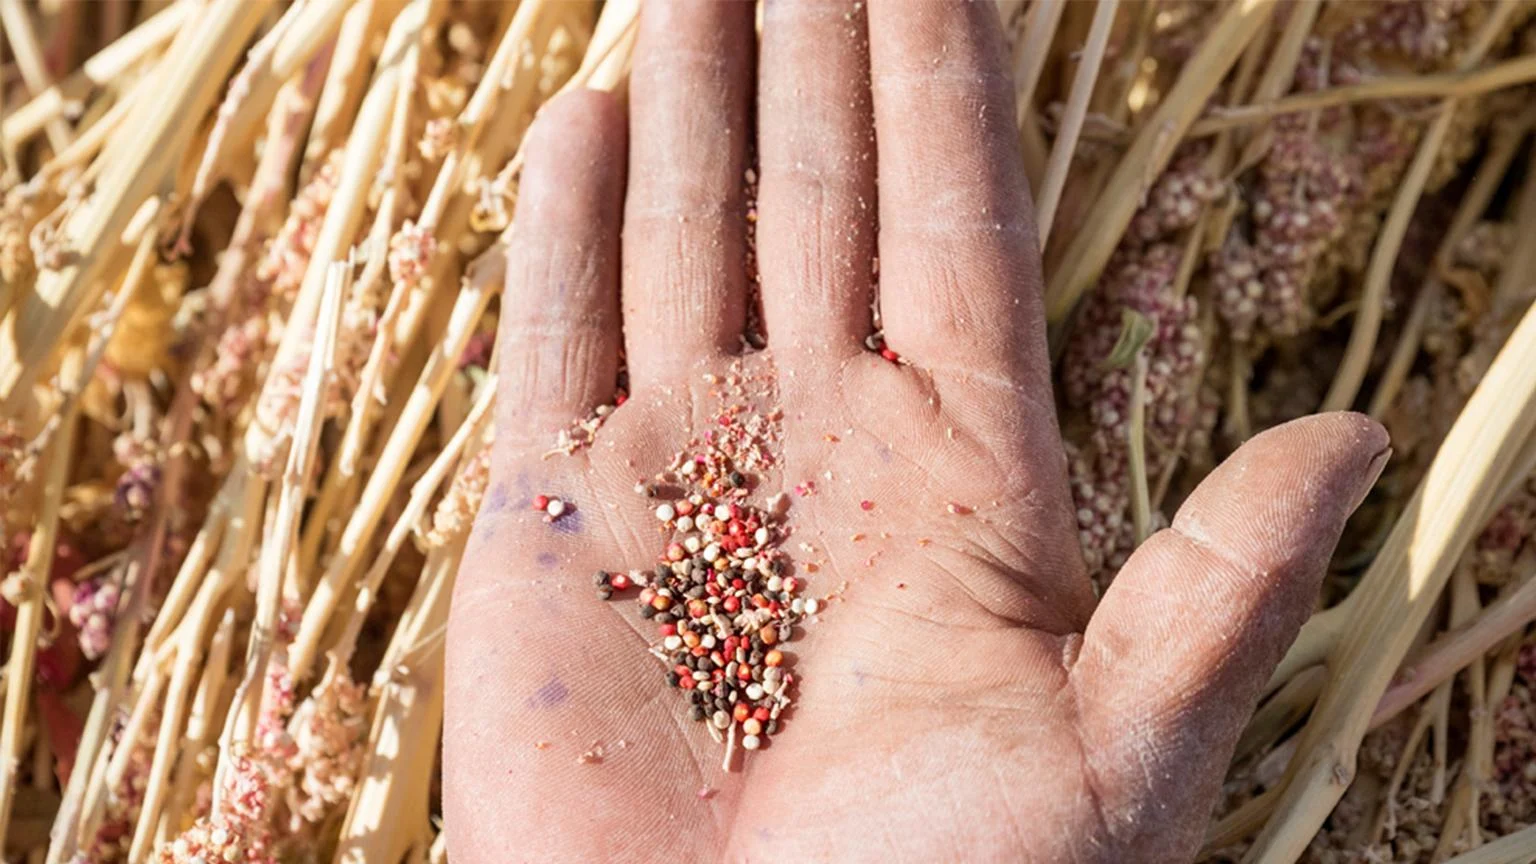 A hand with different colored quinoa grains.